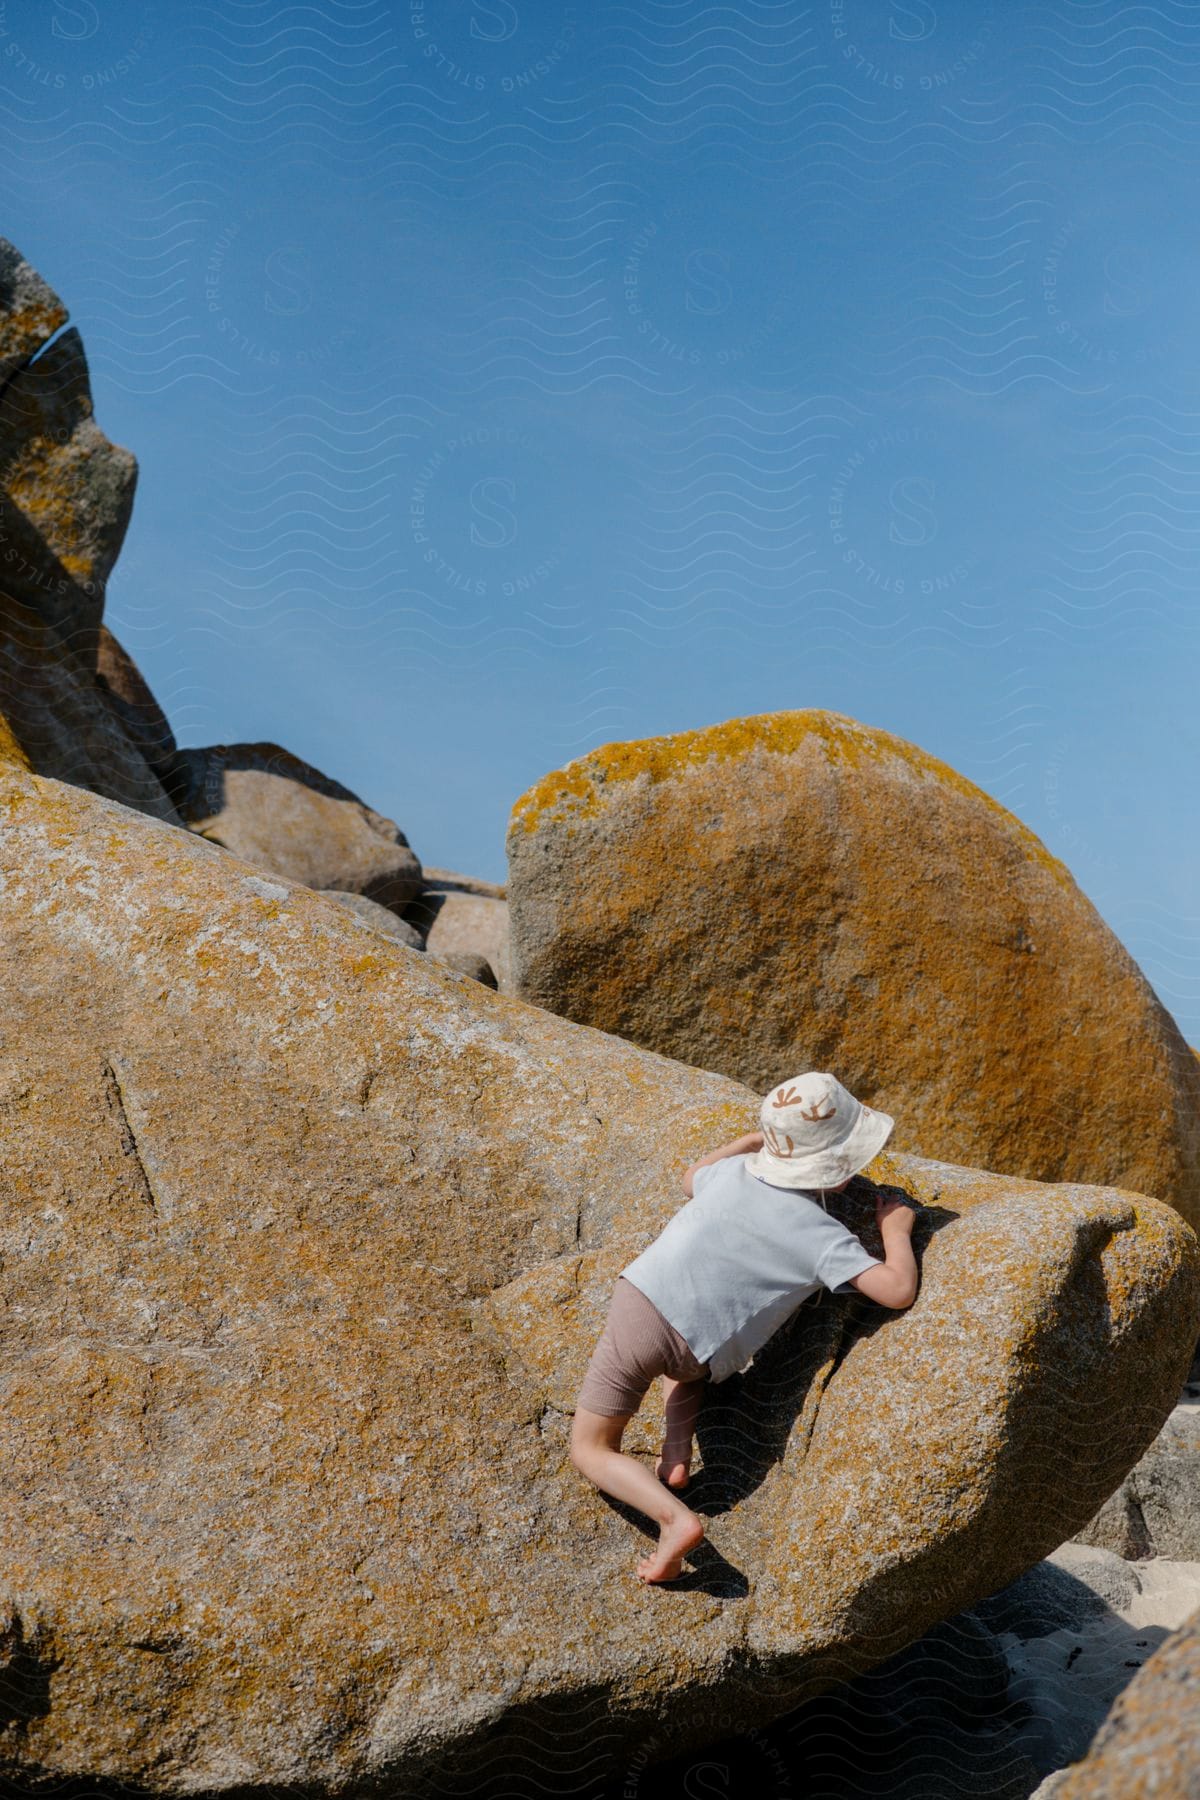 A barefoot child in shorts and bucket hat climbing rocks on a sunny day